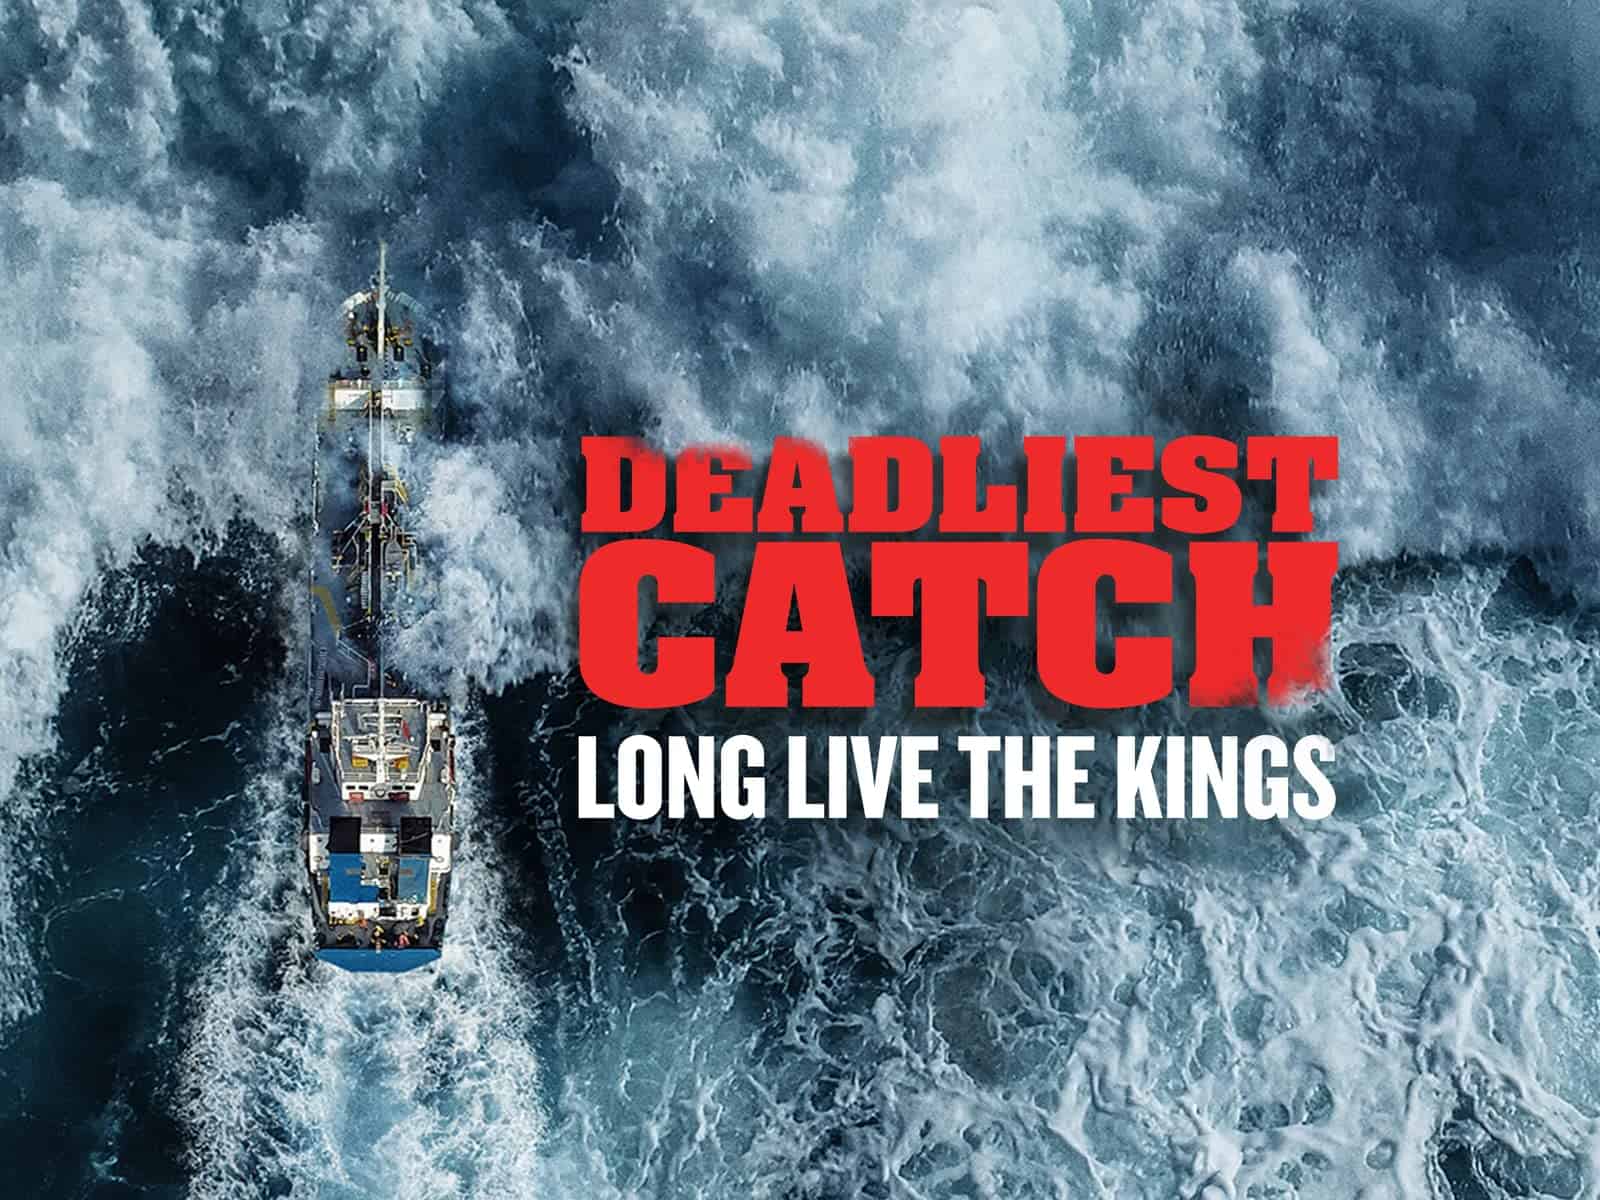 All About The Cast of “Deadliest Catch”